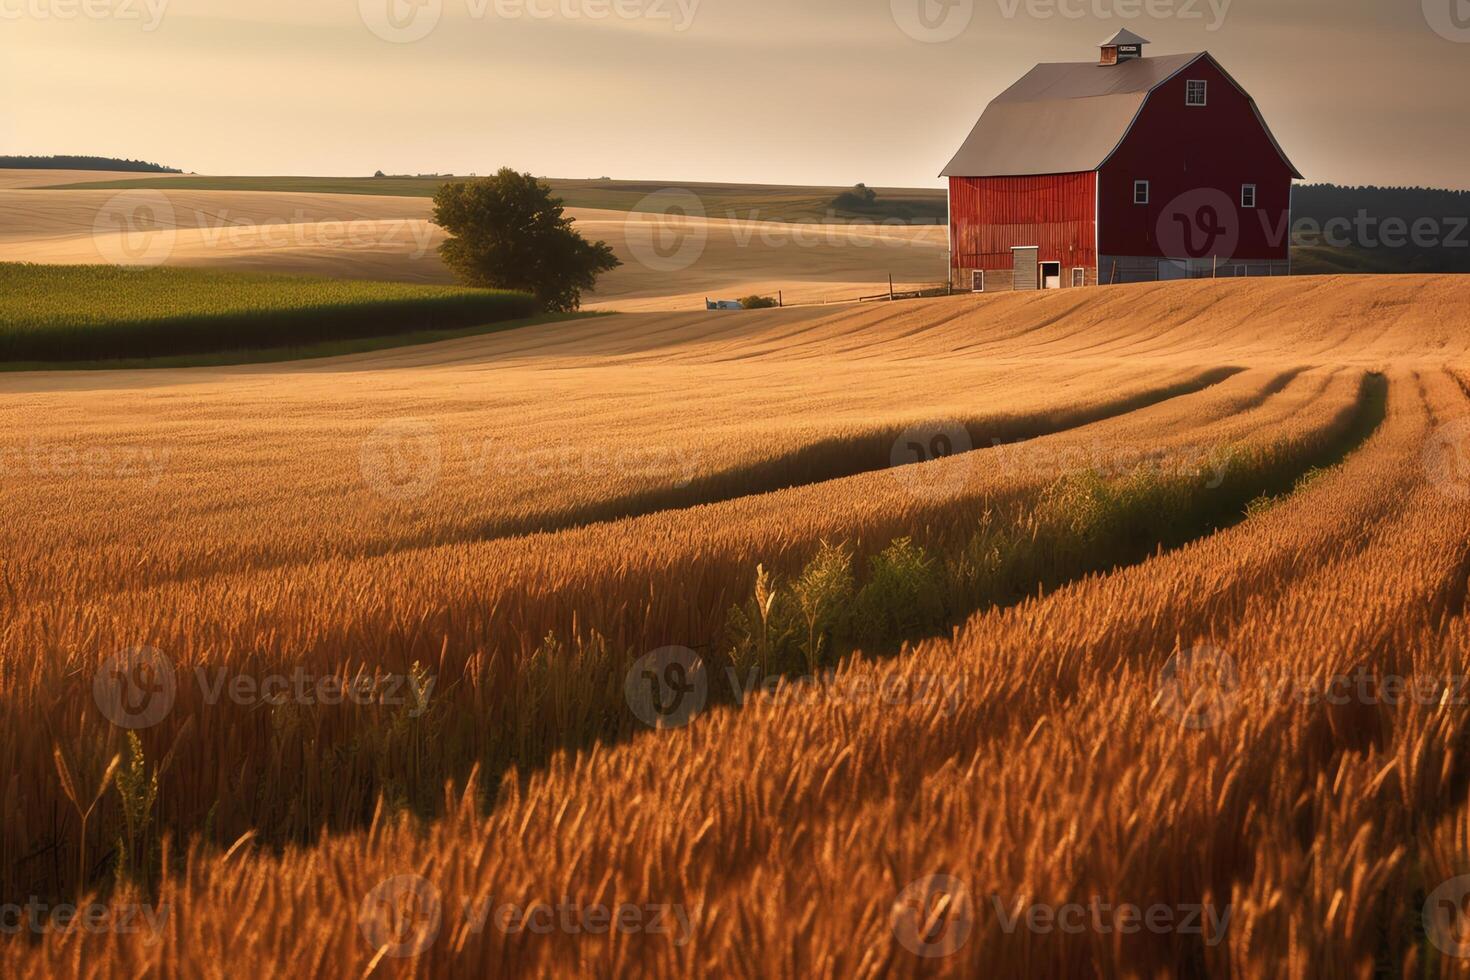 Beautiful landscape scene of a farm red barn next to fields of wheat. photo